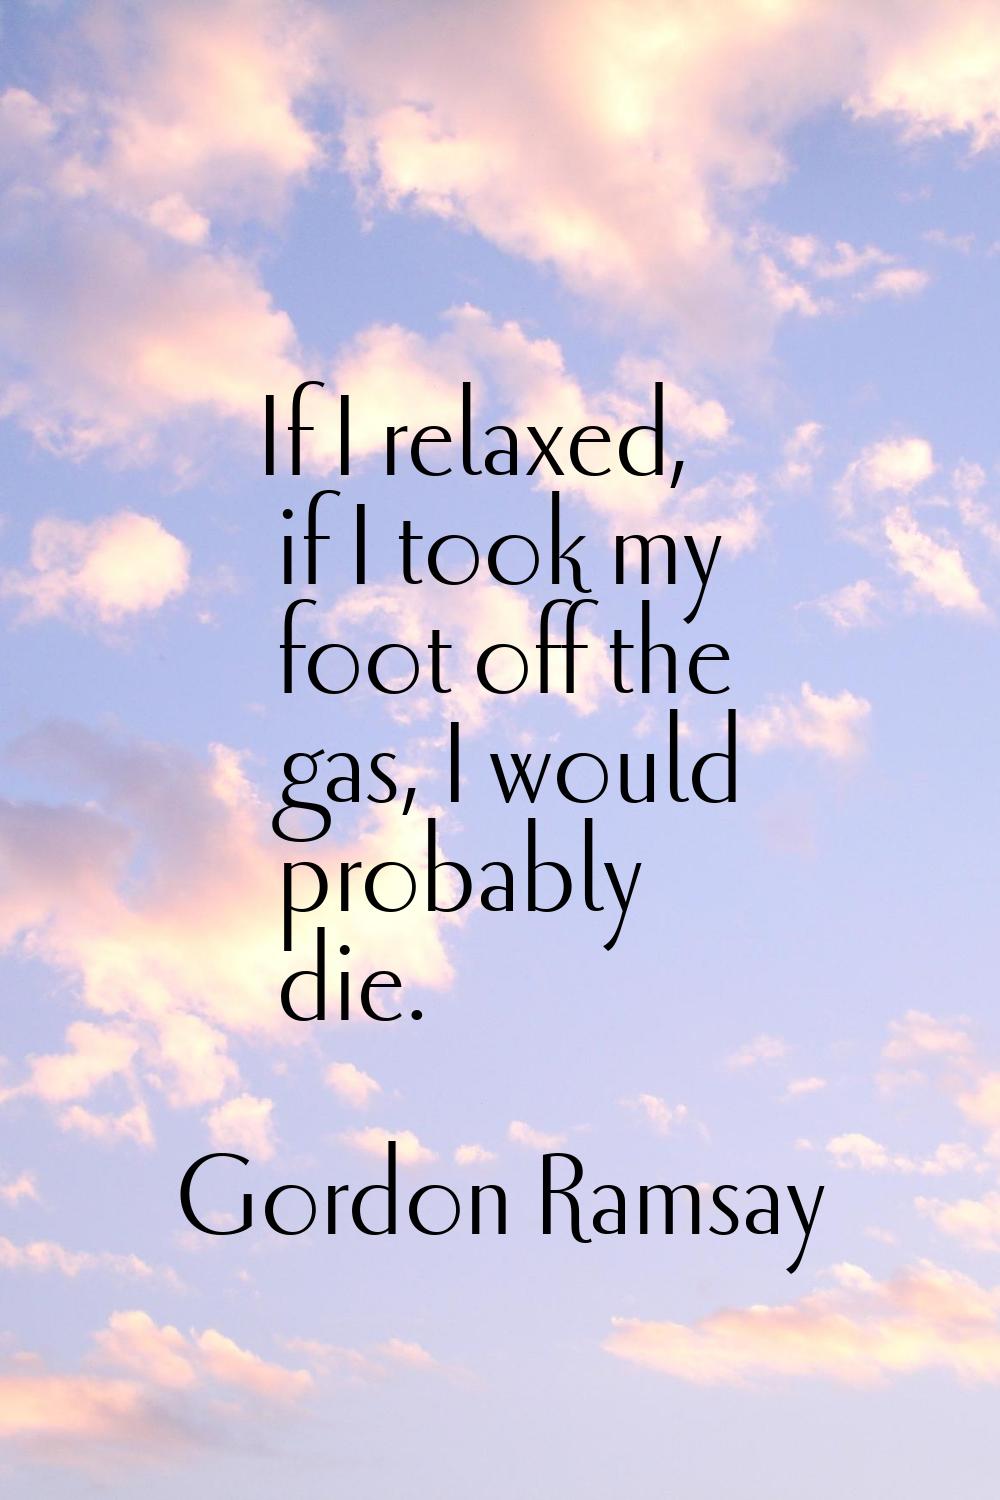 If I relaxed, if I took my foot off the gas, I would probably die.